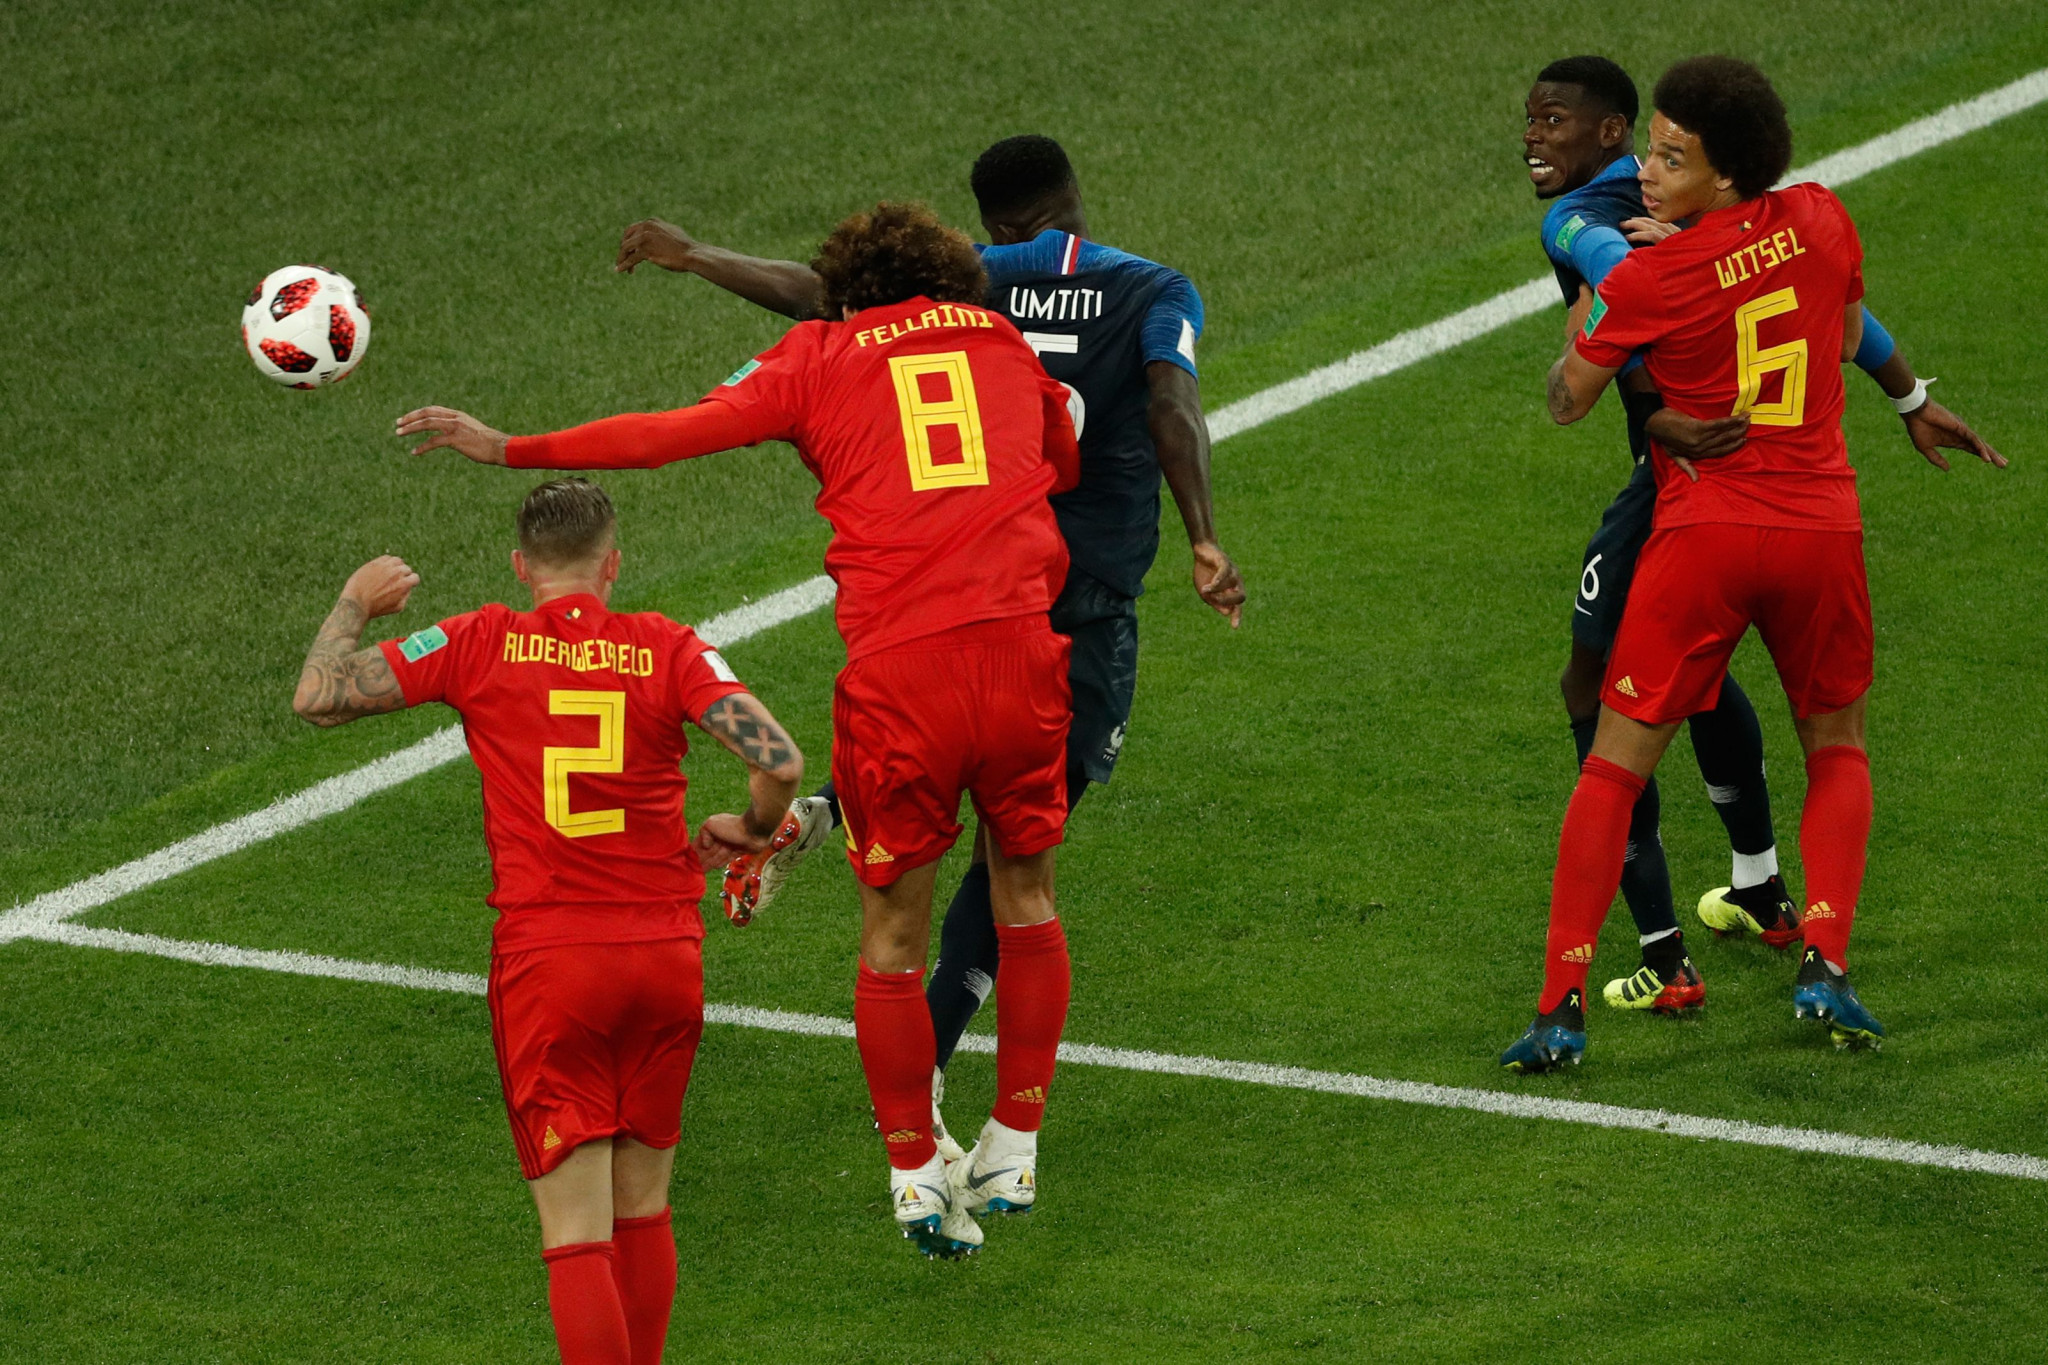 France's Samuel Umtiti rose highest to head home from a corner against Belgium ©Getty Images